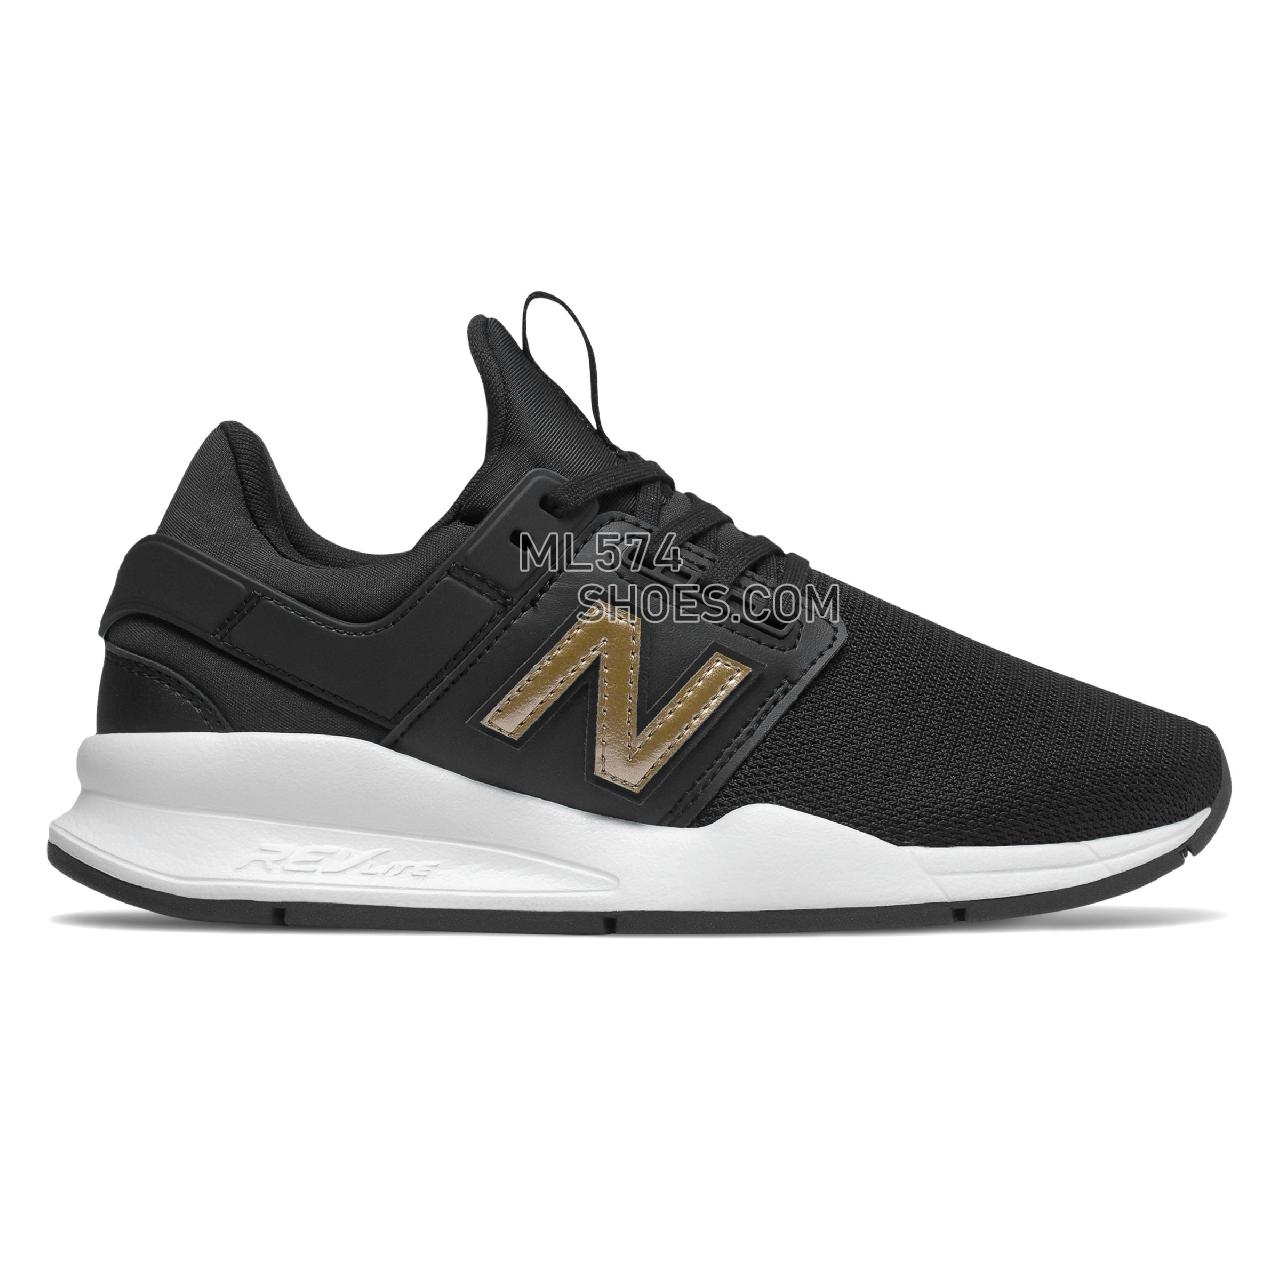 New Balance 247 - Women's Sport Style Sneakers - Black with Gold Metallic - WS247CNS